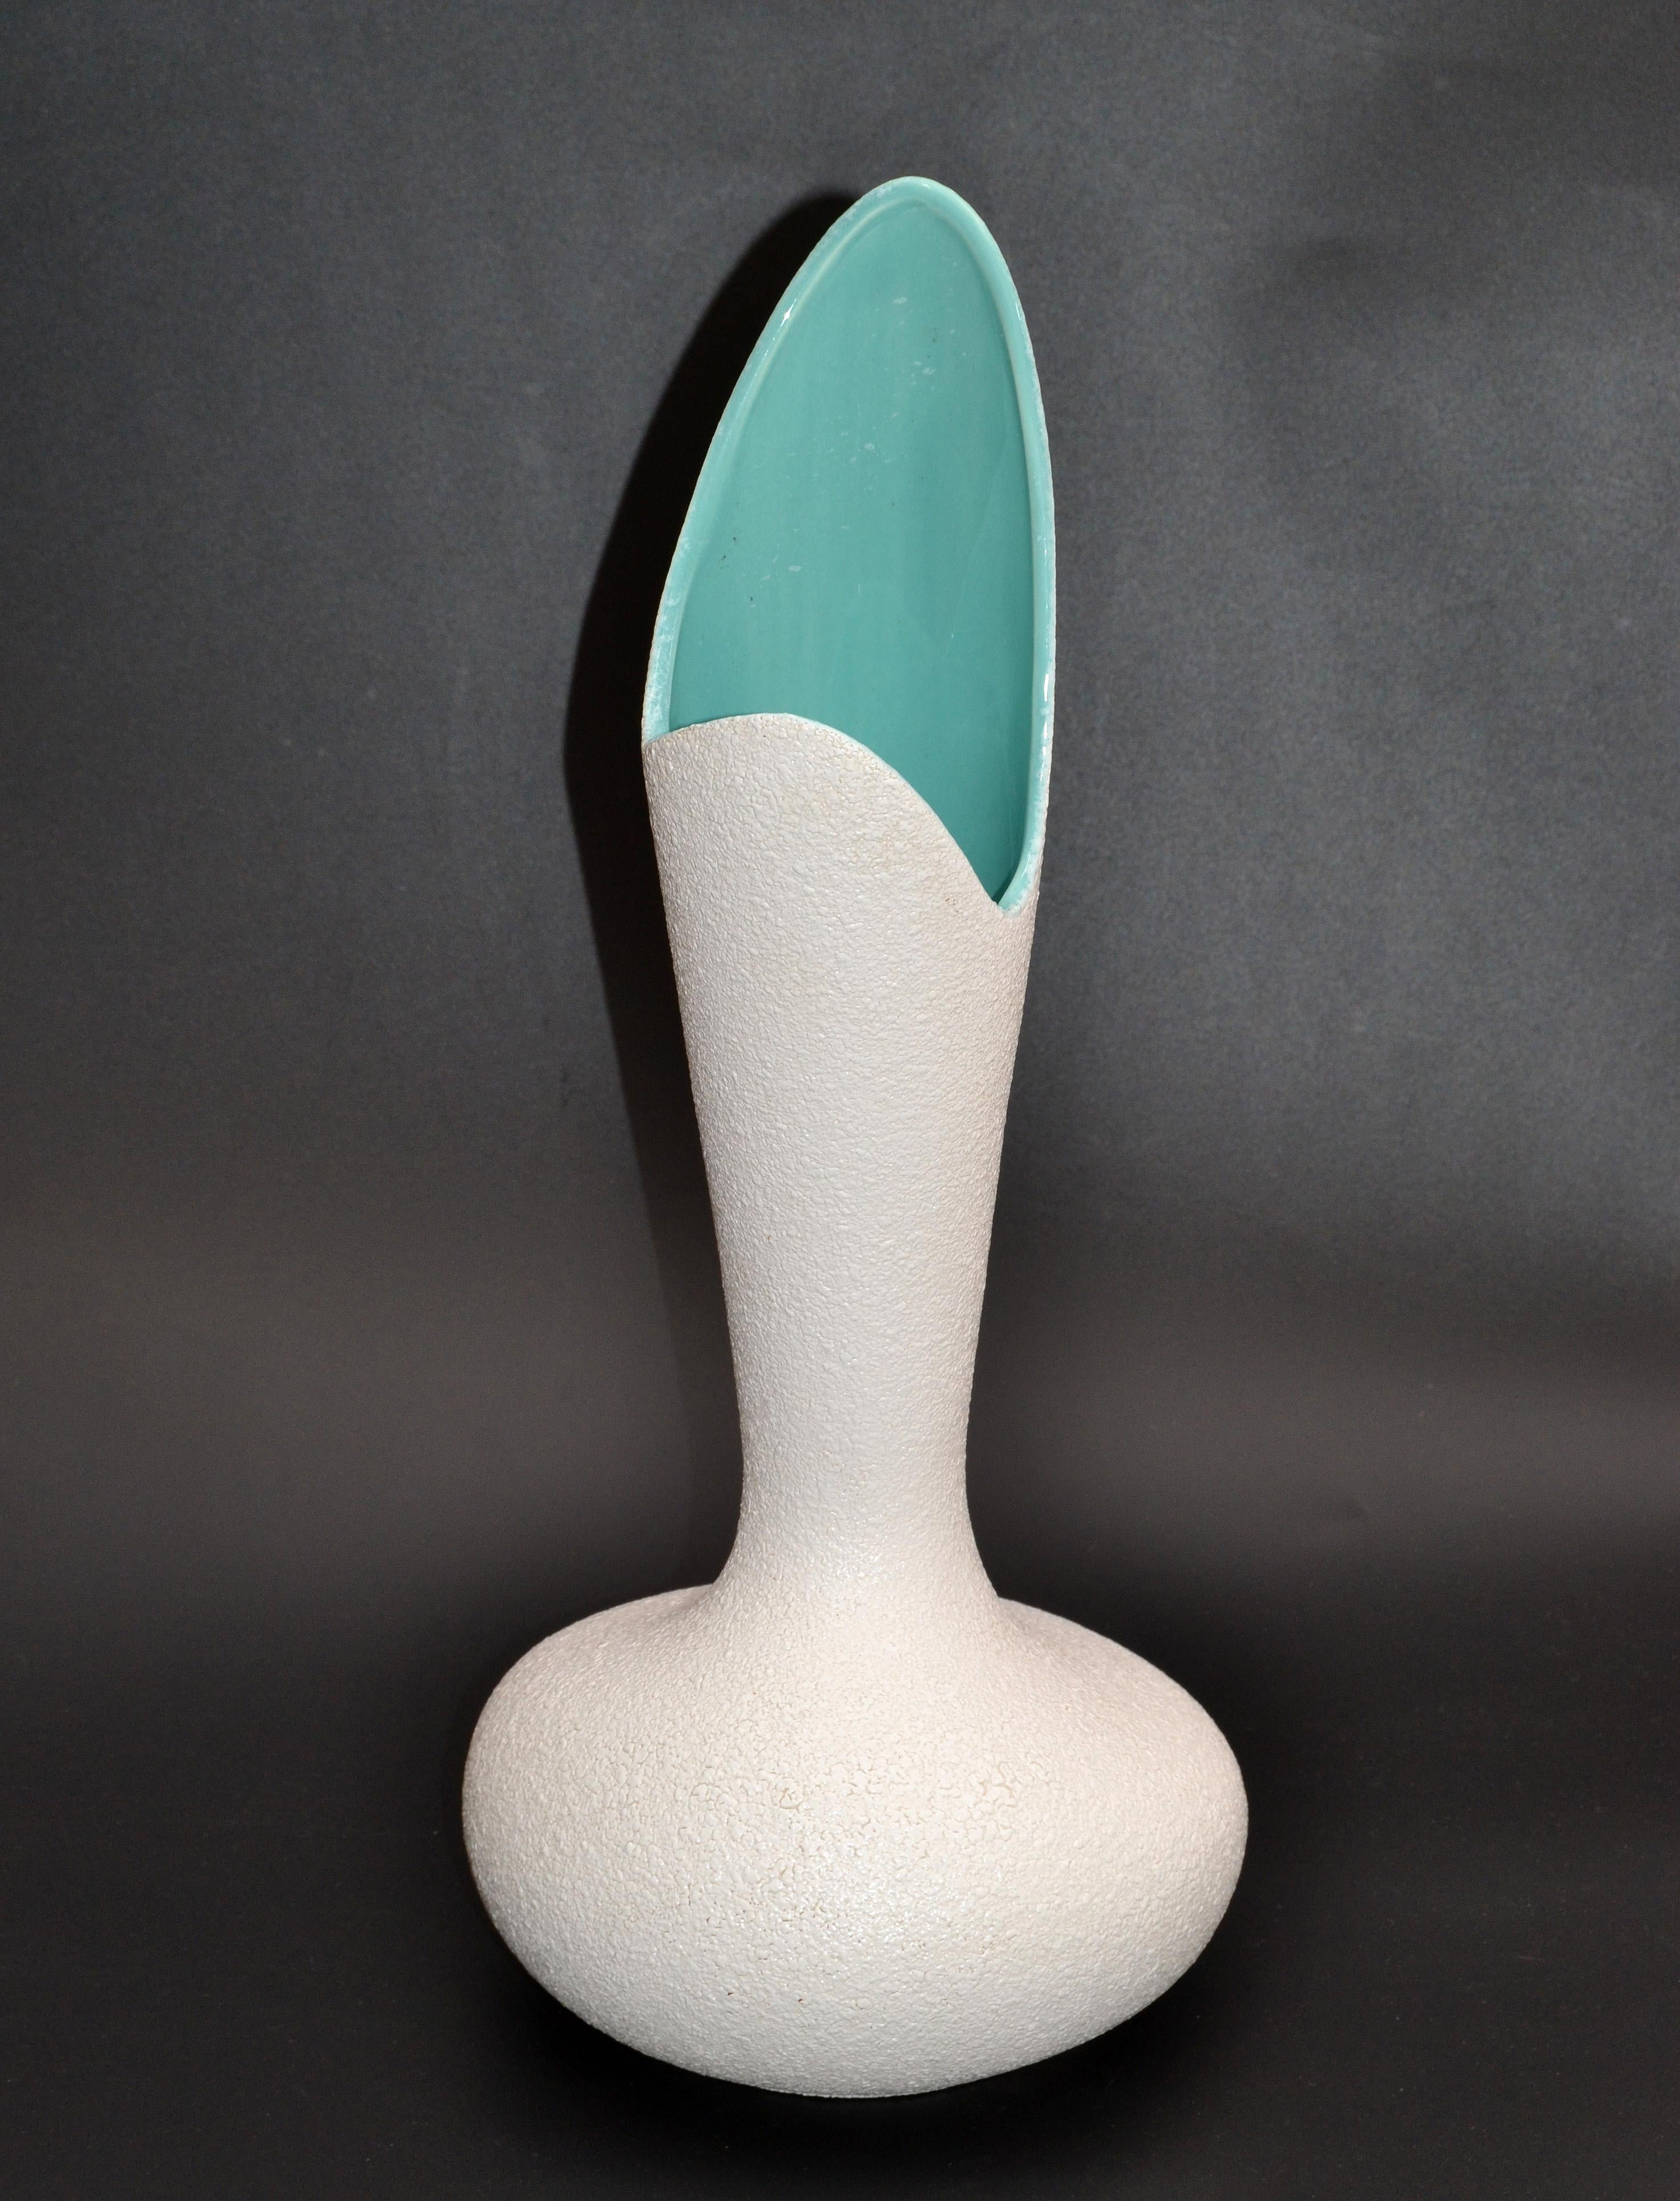 Original Mid-Century Modern Royal Haeger pottery flower vase in white lava glaze and turquoise glaze inside. Made in America.
Impressive and practical as well.